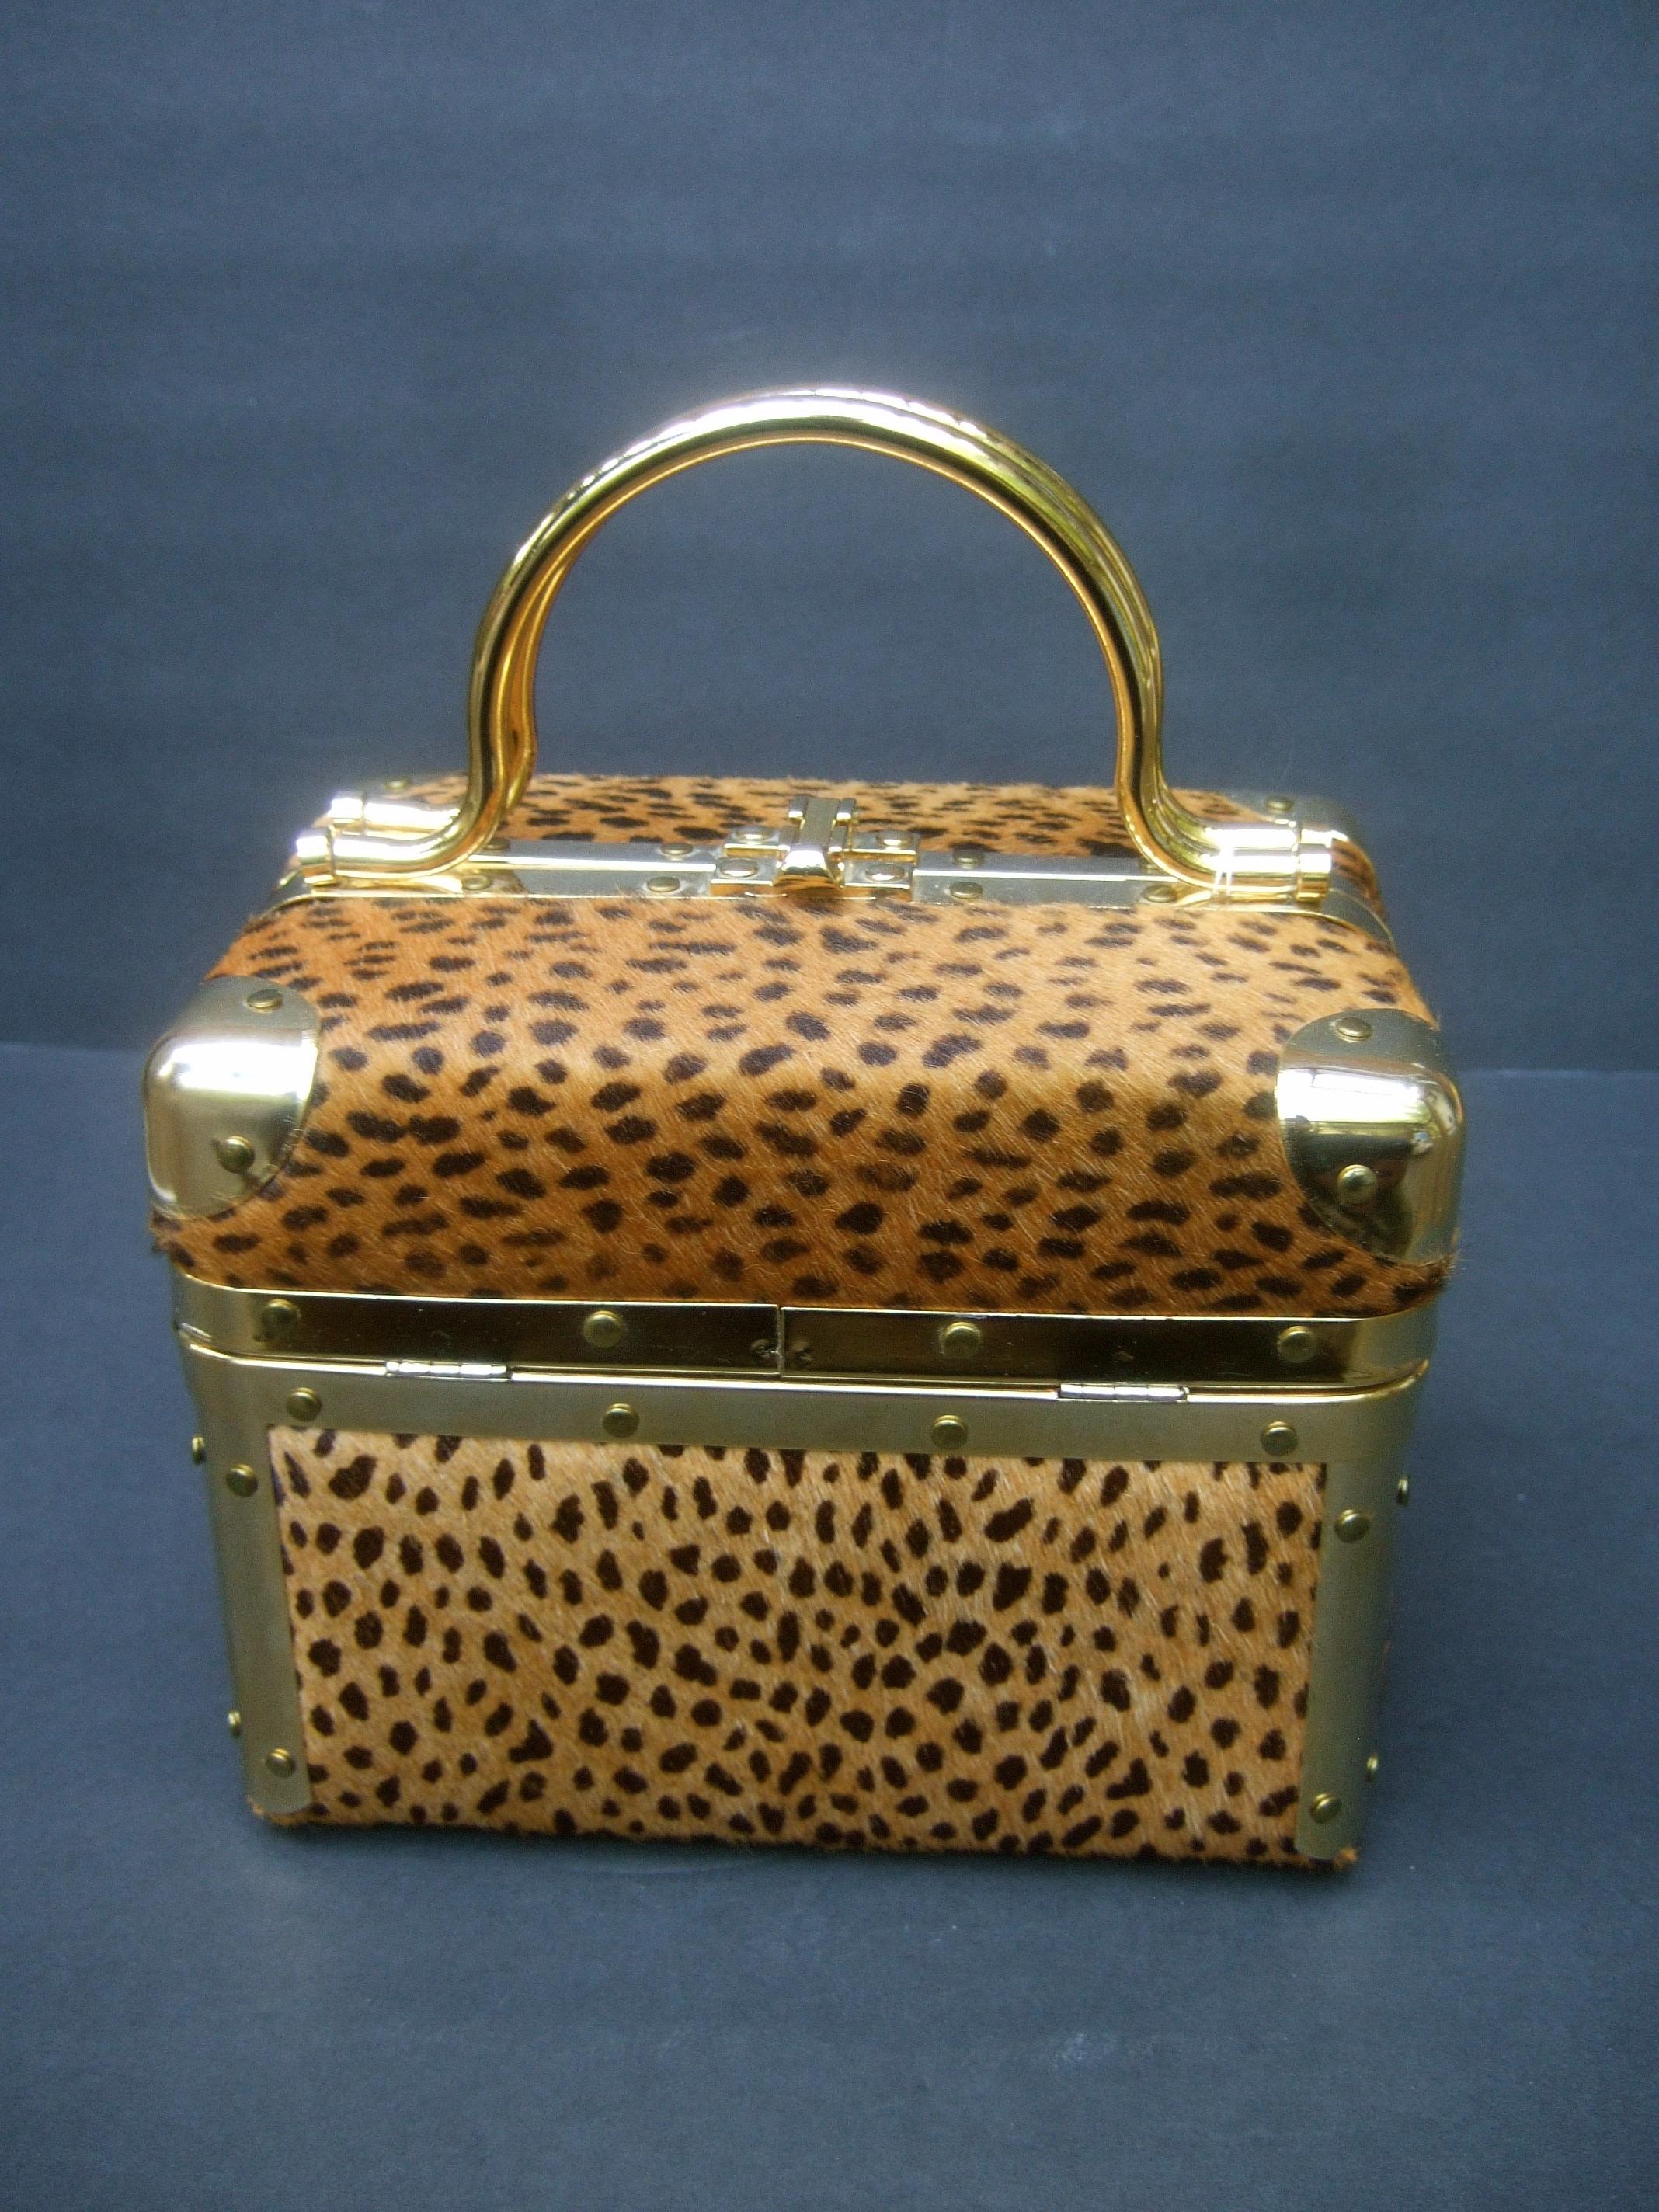 Animal print box purse designed by Lisette New York c 1980s
The stylish handbag is covered with animal print pony fur
Framed with gilt metal hardware; paired with matching gold metal
swivel handles 

The interior is lined in brown taffeta with a